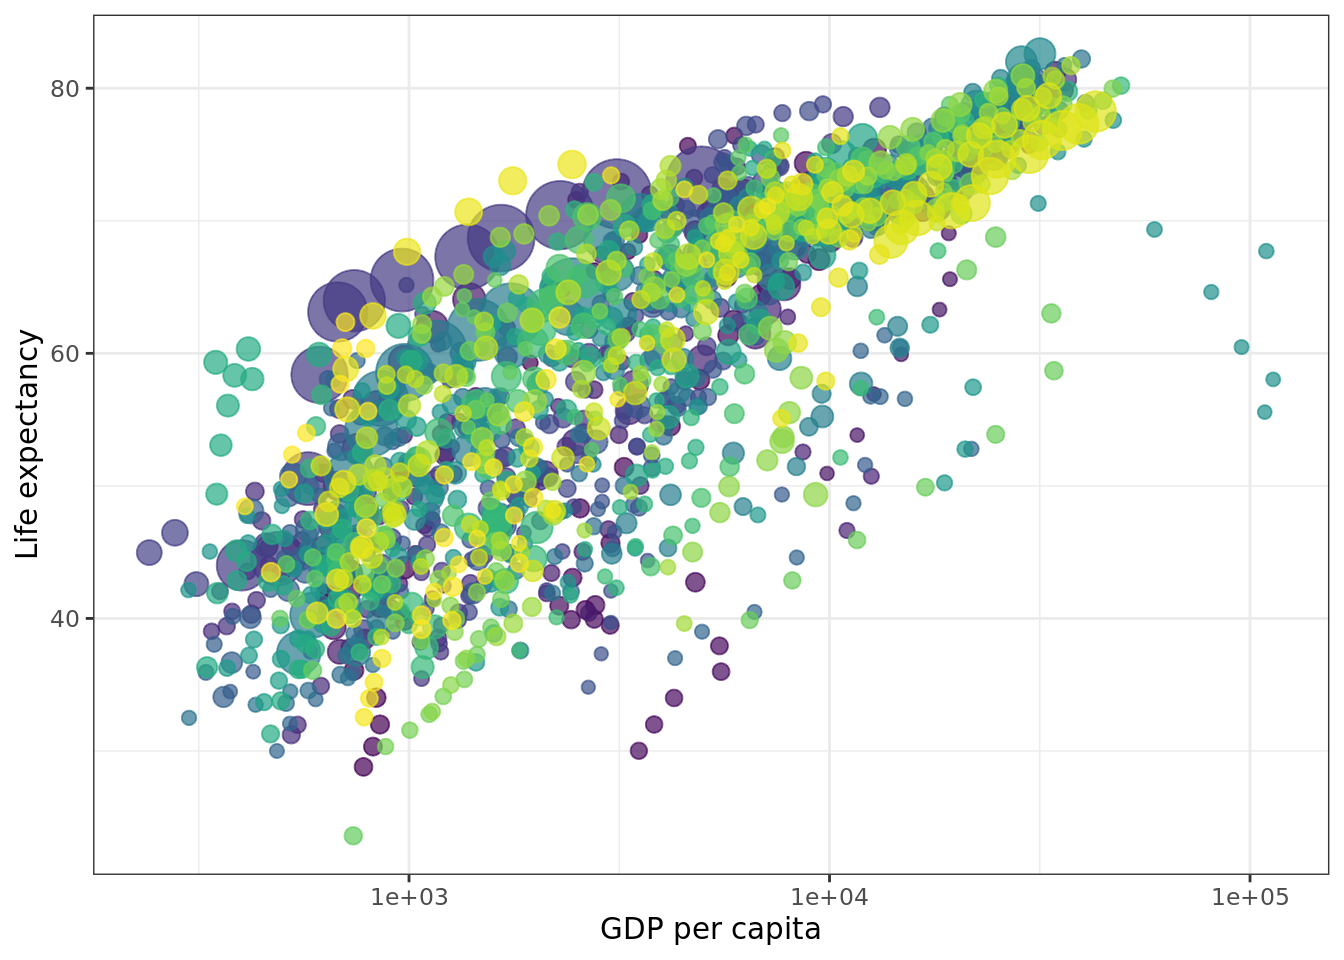 All the GDP and Lifexpectancy data, overplotted